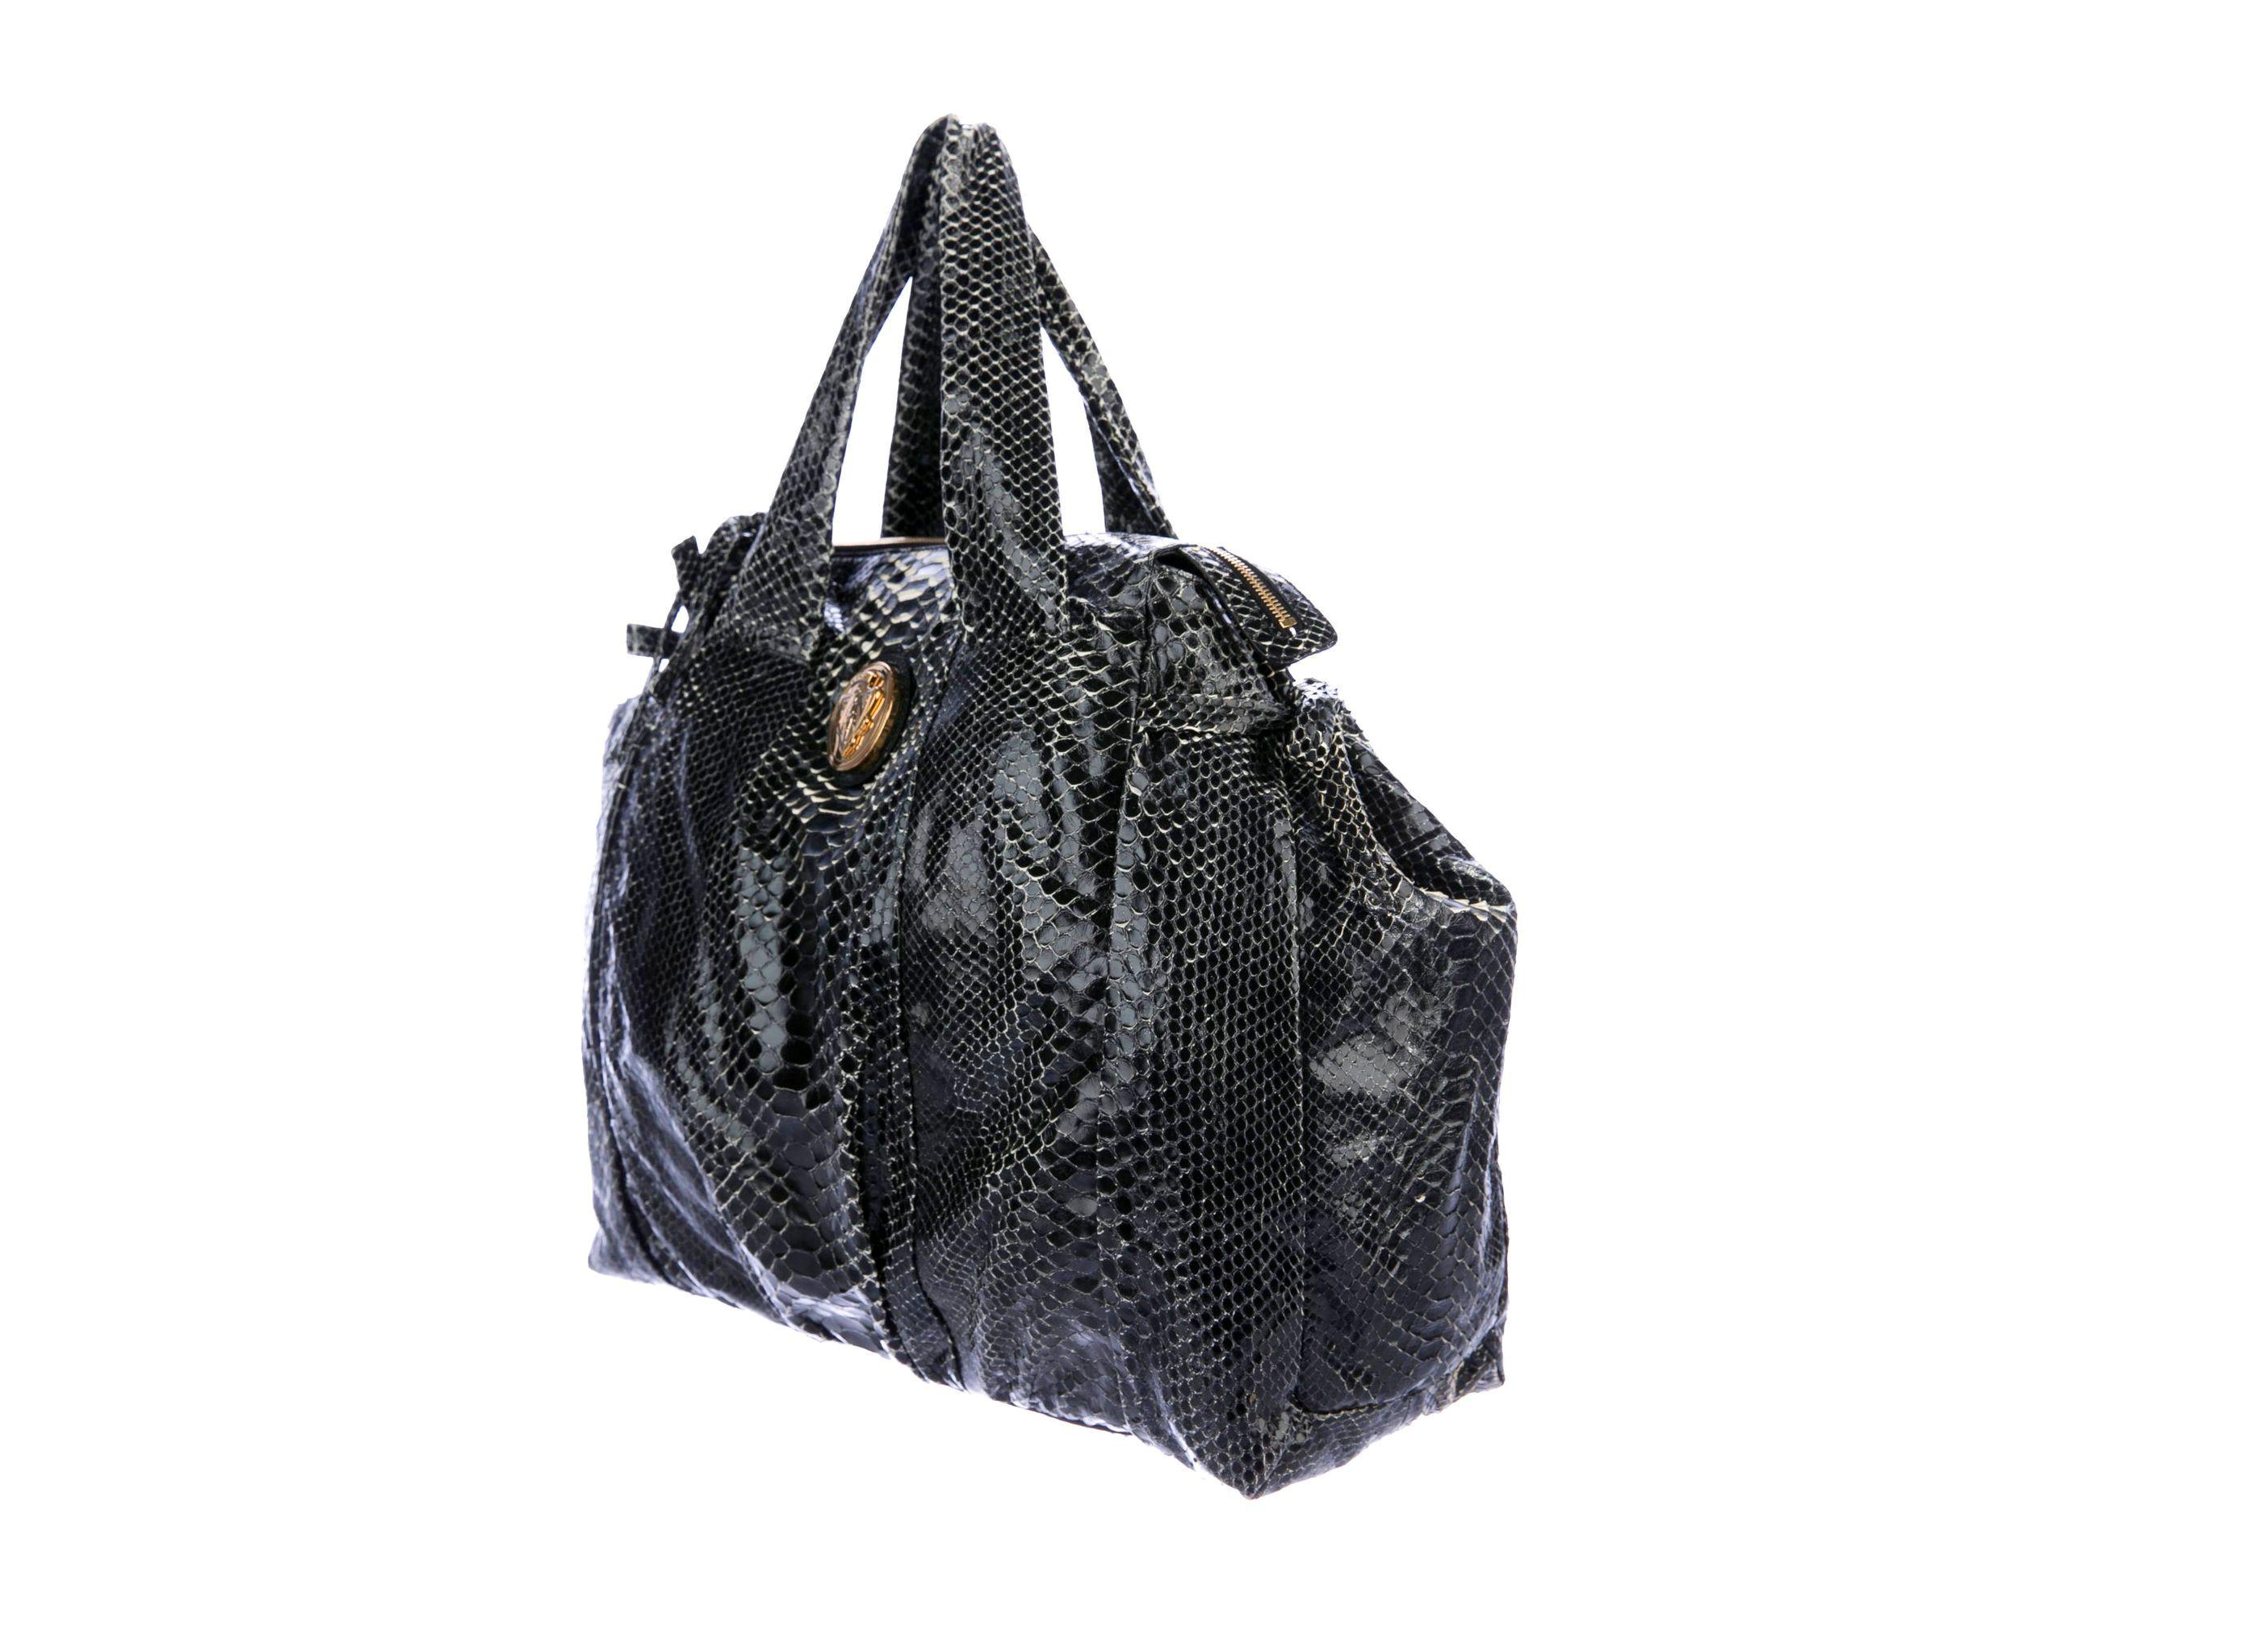 Stunning Gucci Python Skin Handbag
XL size 
Made of finest exotic python skin
Treated in a very special way so the white shines through
A real eye catcher
Closes with zipper on top
Golden hardware
Fully lined
One pocket inside
Brandnew, complete